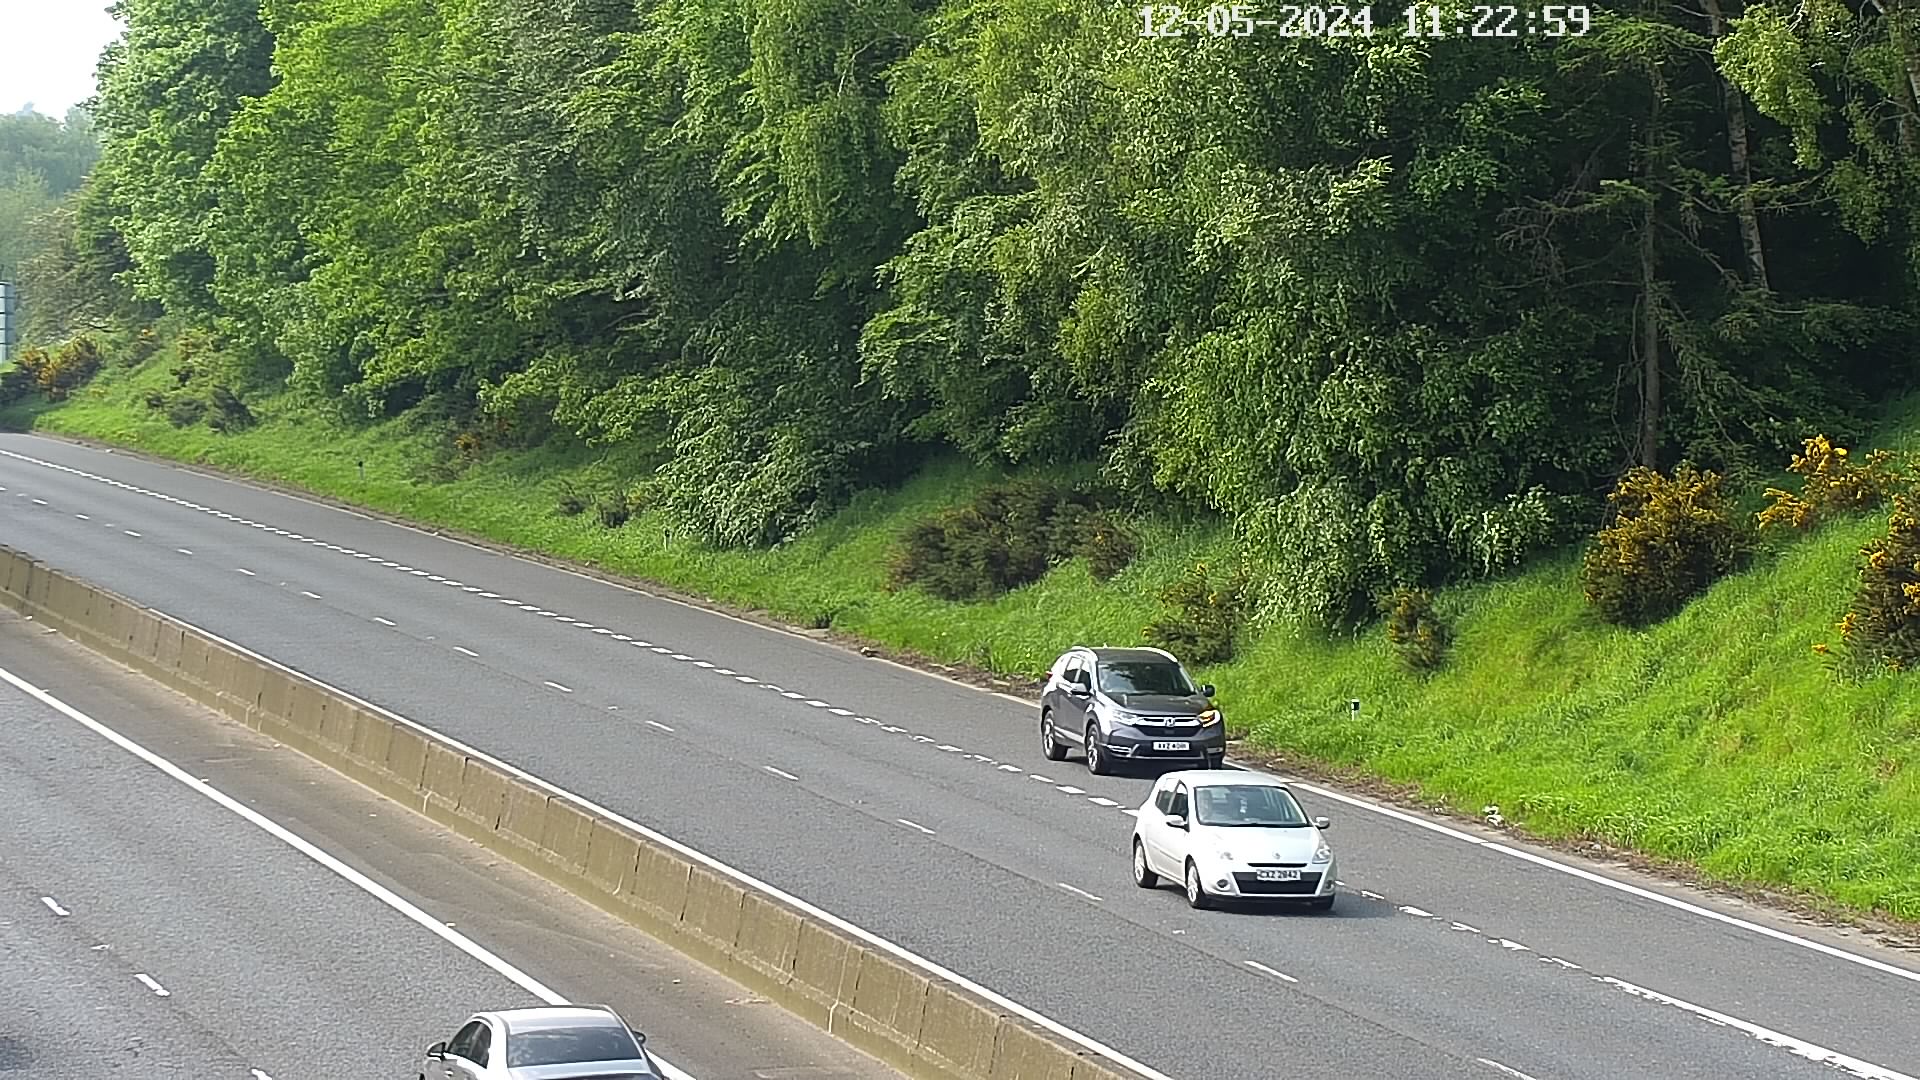 CCTV Camera image for M1 - Lisburn Services (5A03)